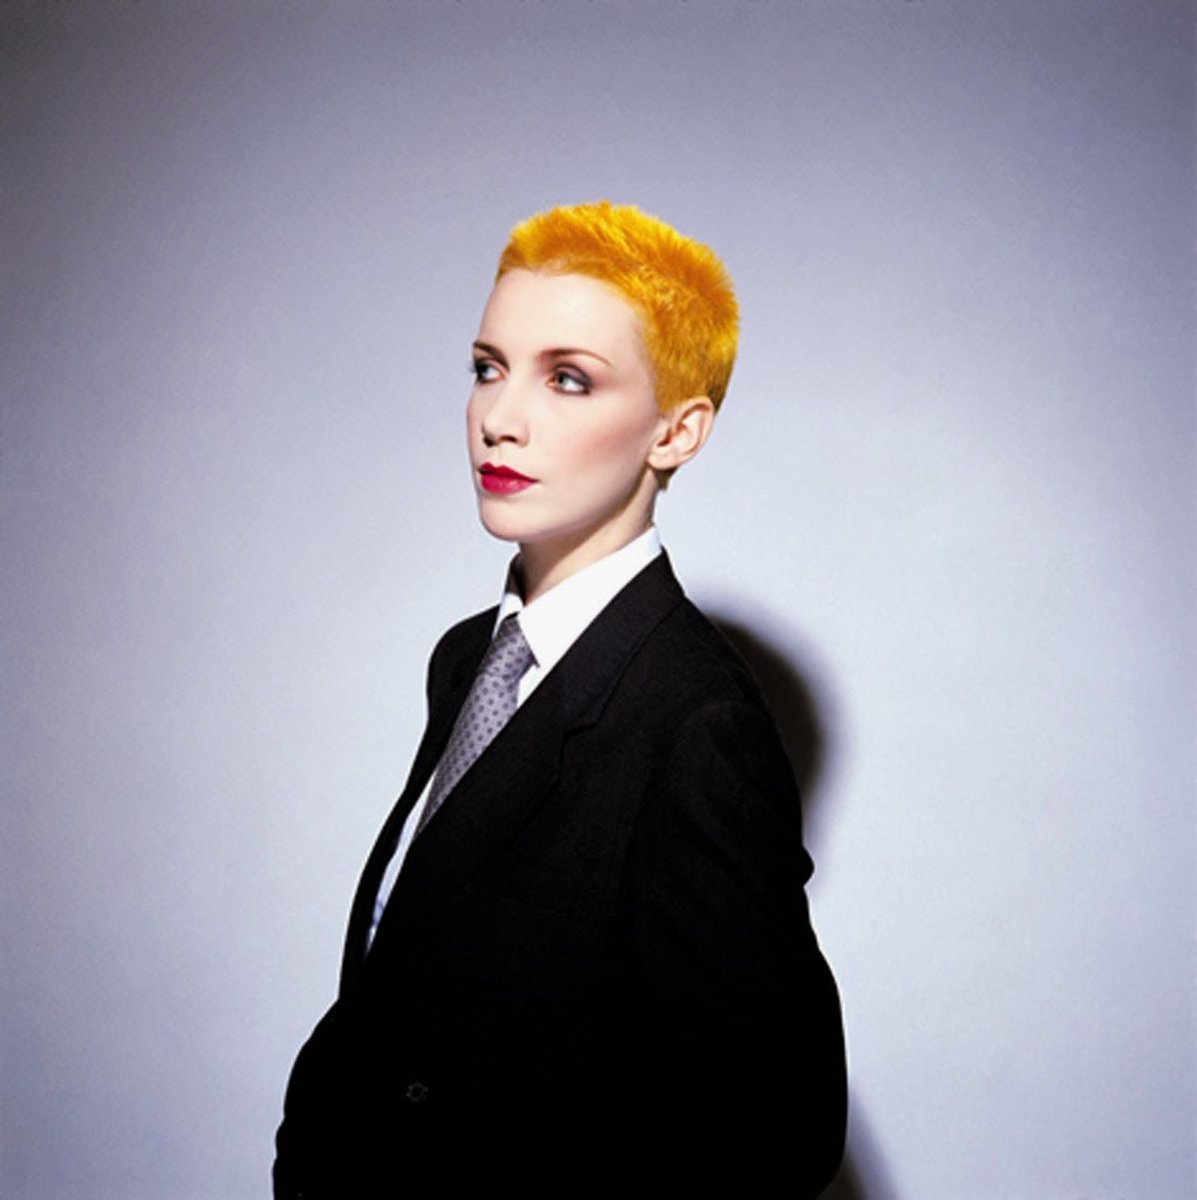 I’ll have Annie Lennox with my morning coffee. Please and thank you.